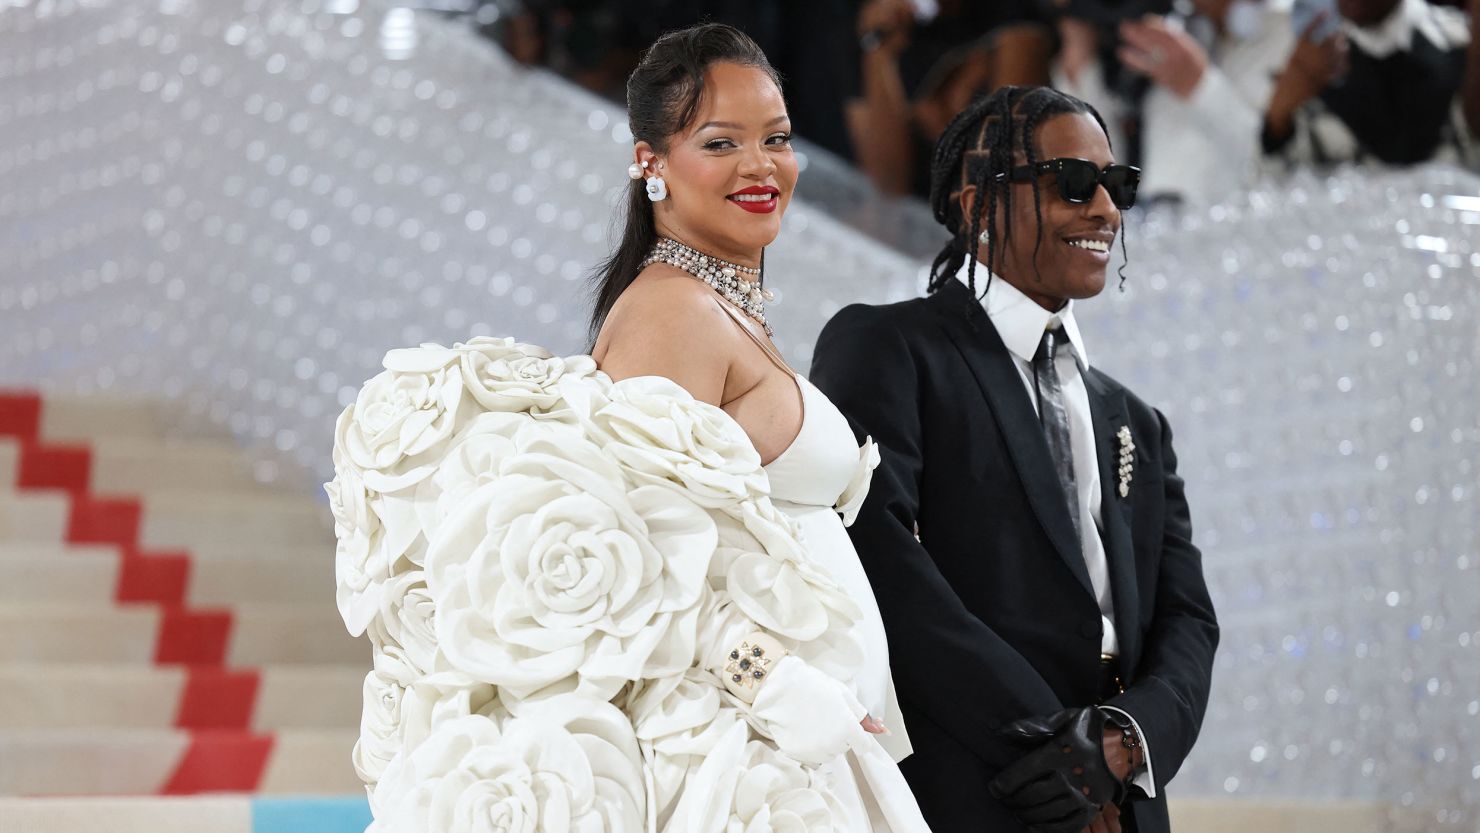 Rihanna and A$AP Rocky pose for family photos with new baby | CNN